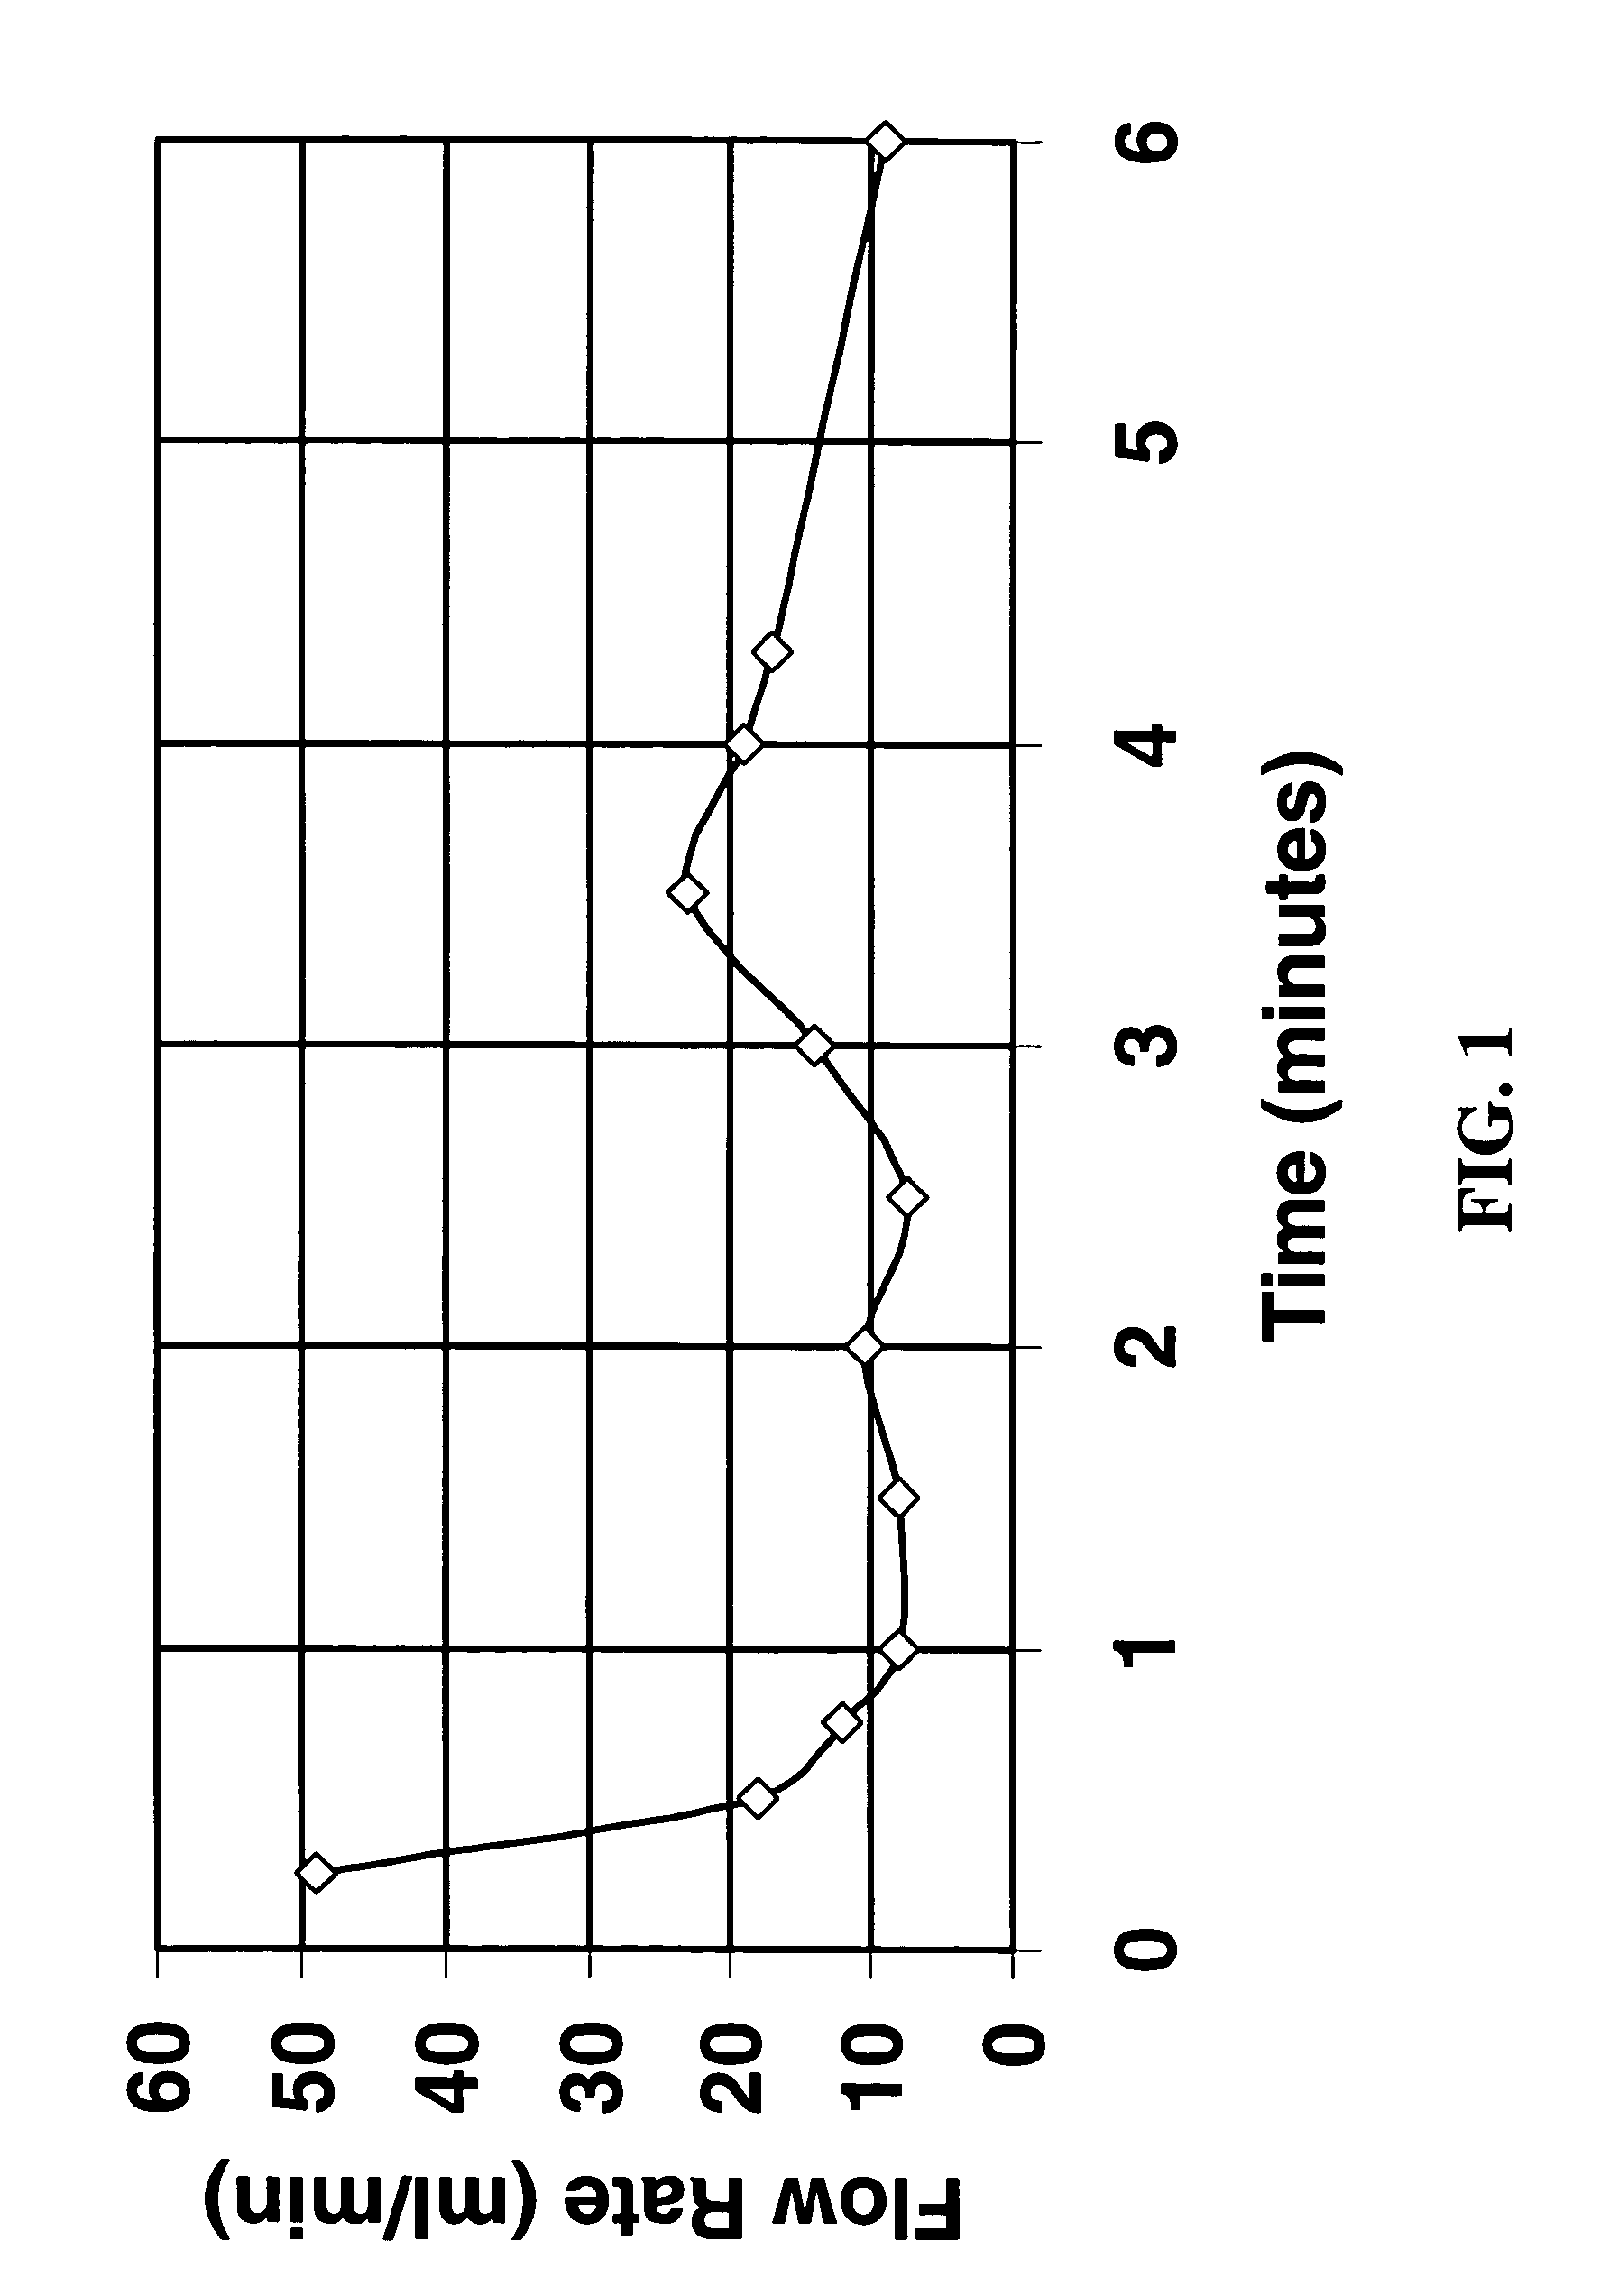 Methods for controlling fluid loss